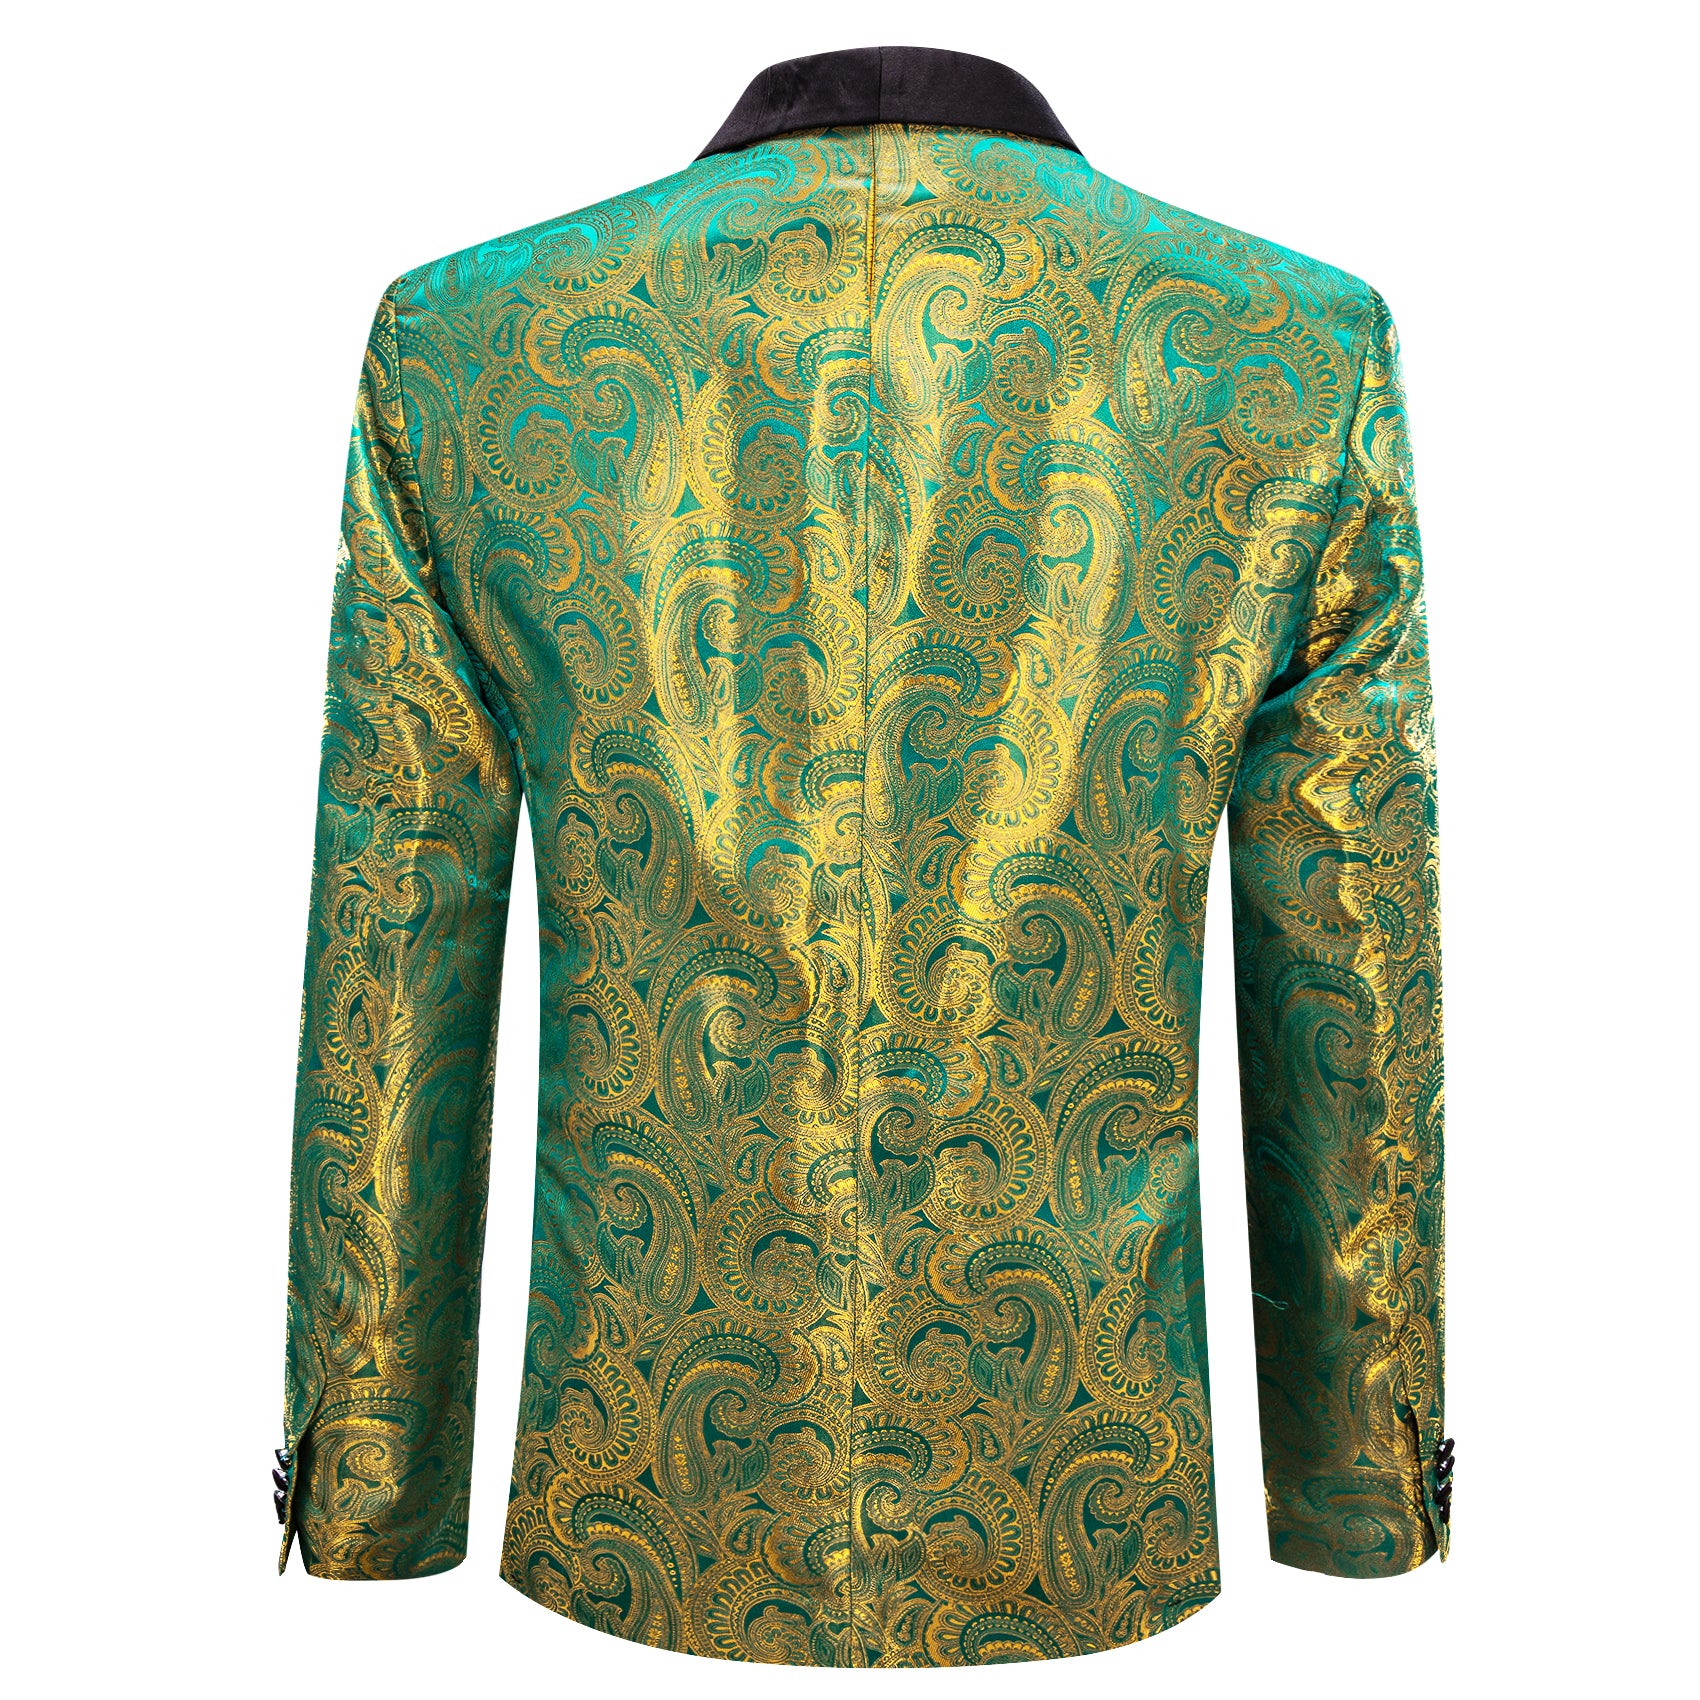 Barry.wang Shawl Collar Suit Men's Bright Green Floral Suit Jacket